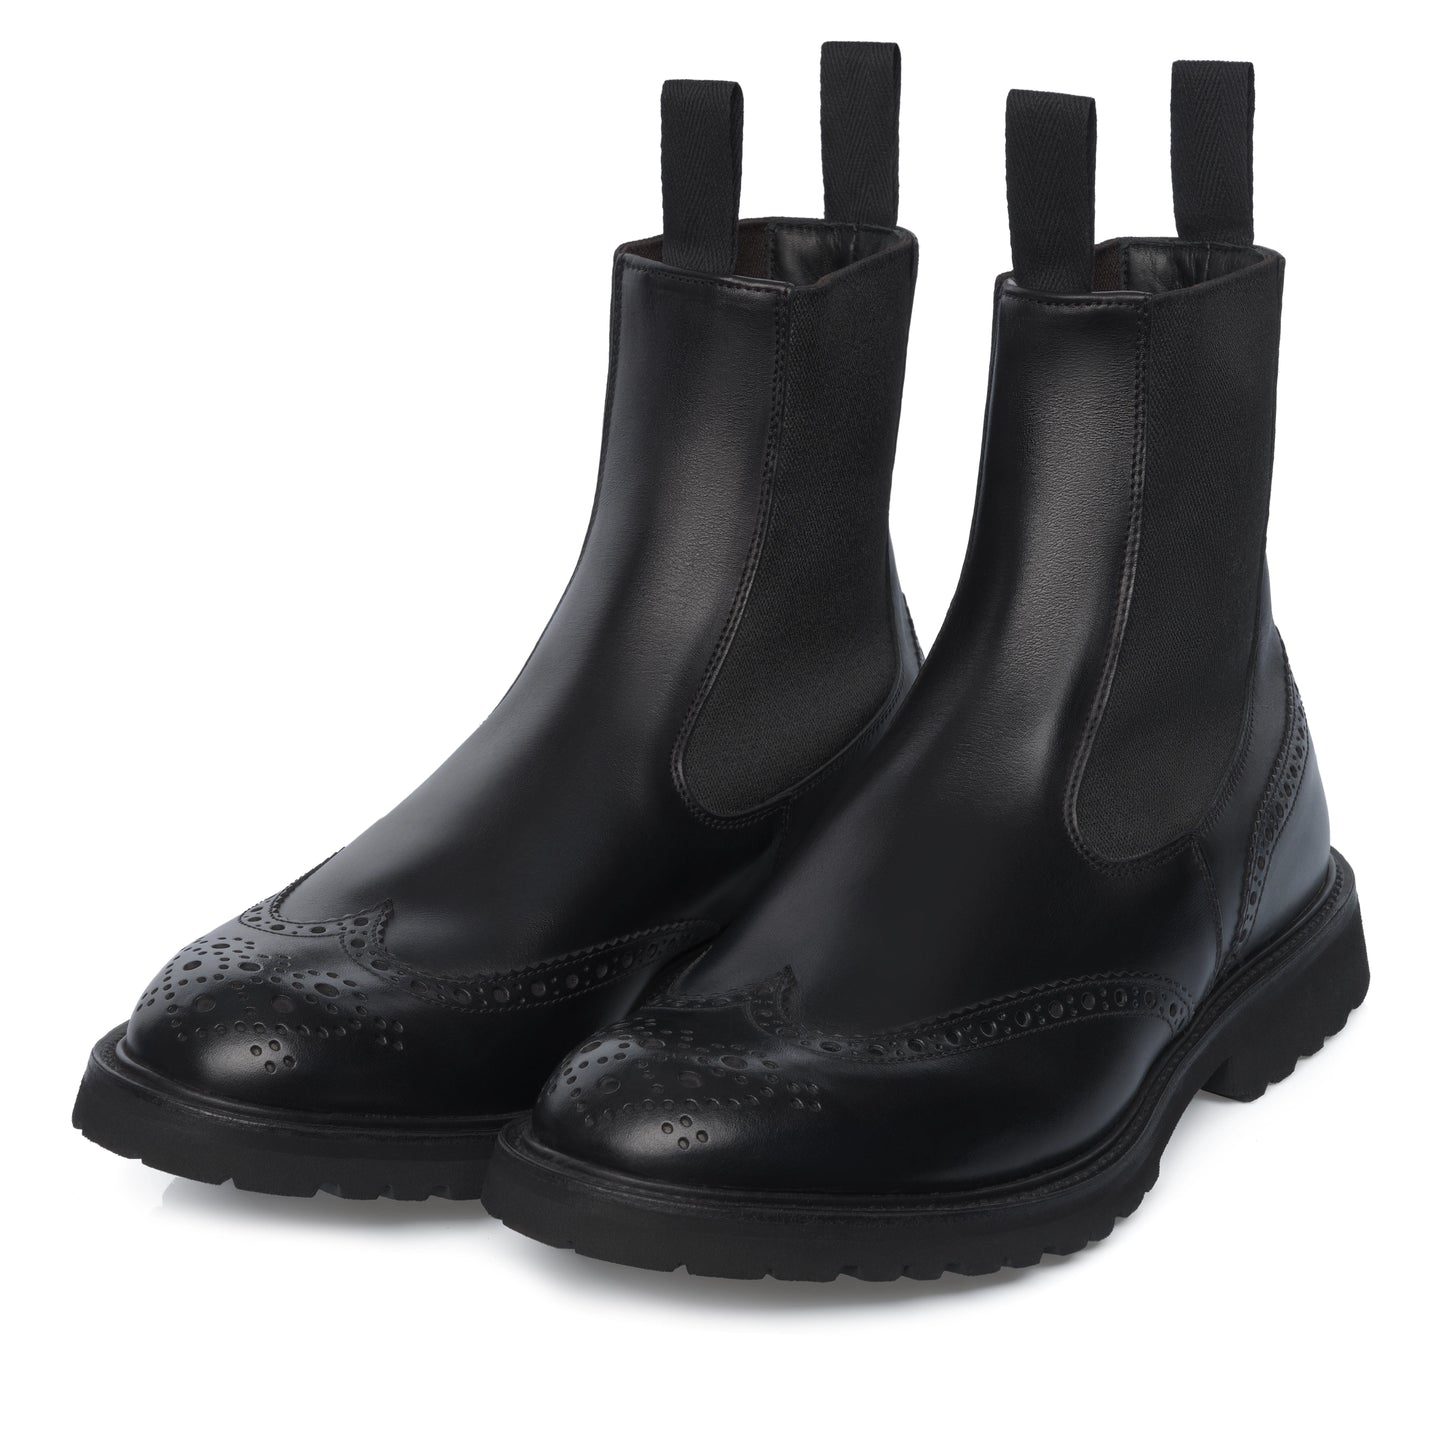 "Henry" Leather Slip-On Chelsea Boots in Black